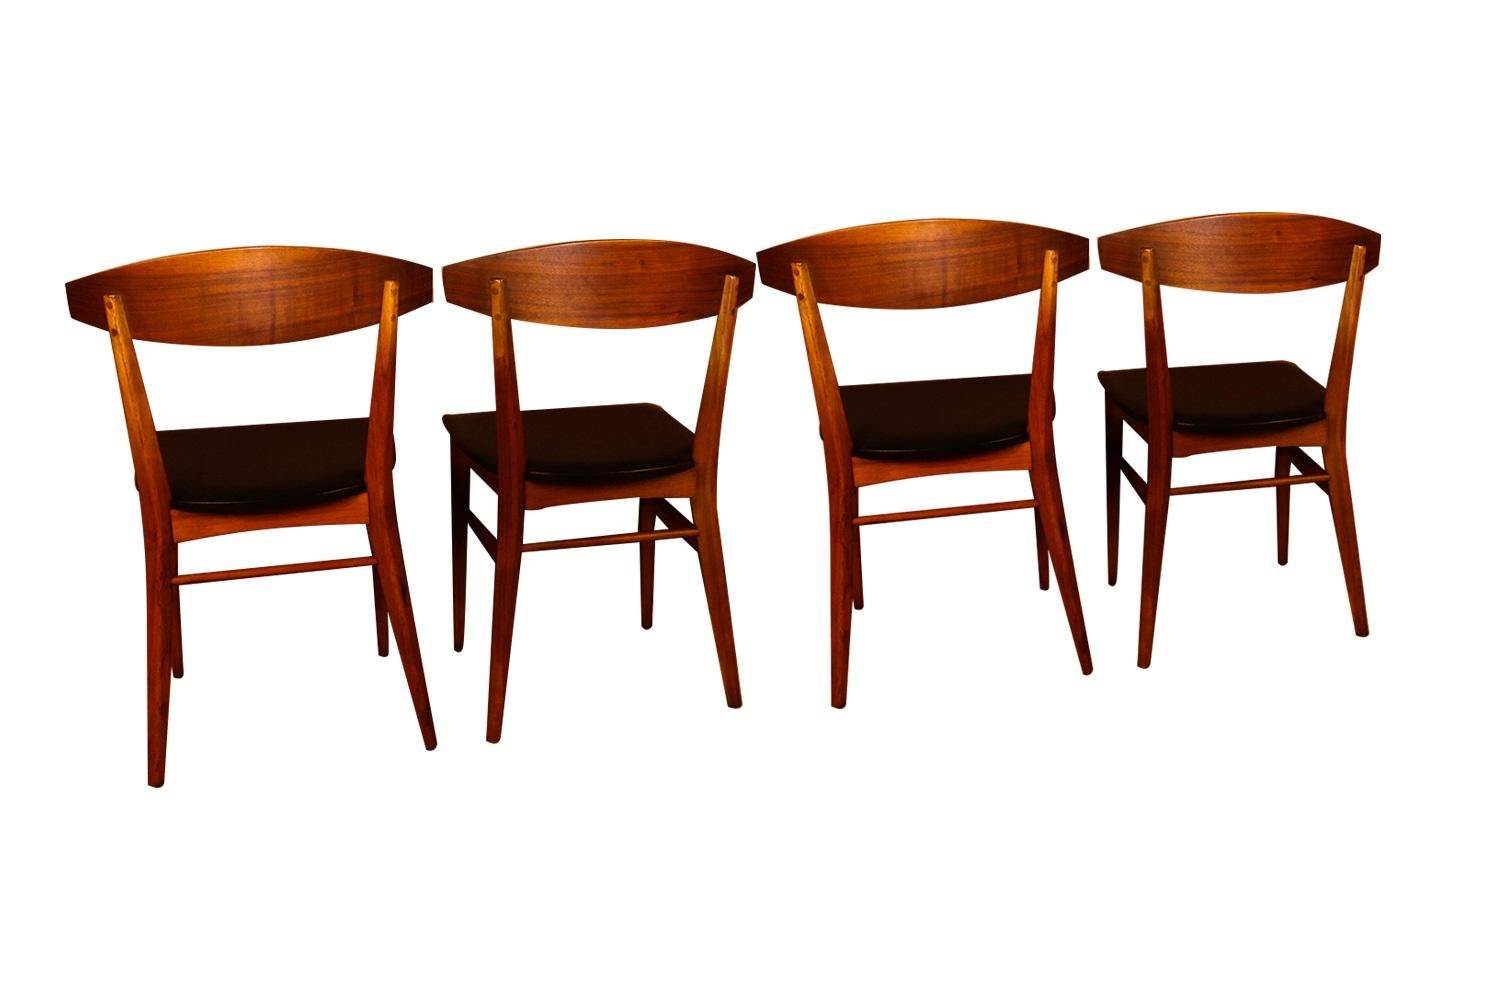 Mid-20th Century Midcentury Paul McCobb for Lane Dining Chairs